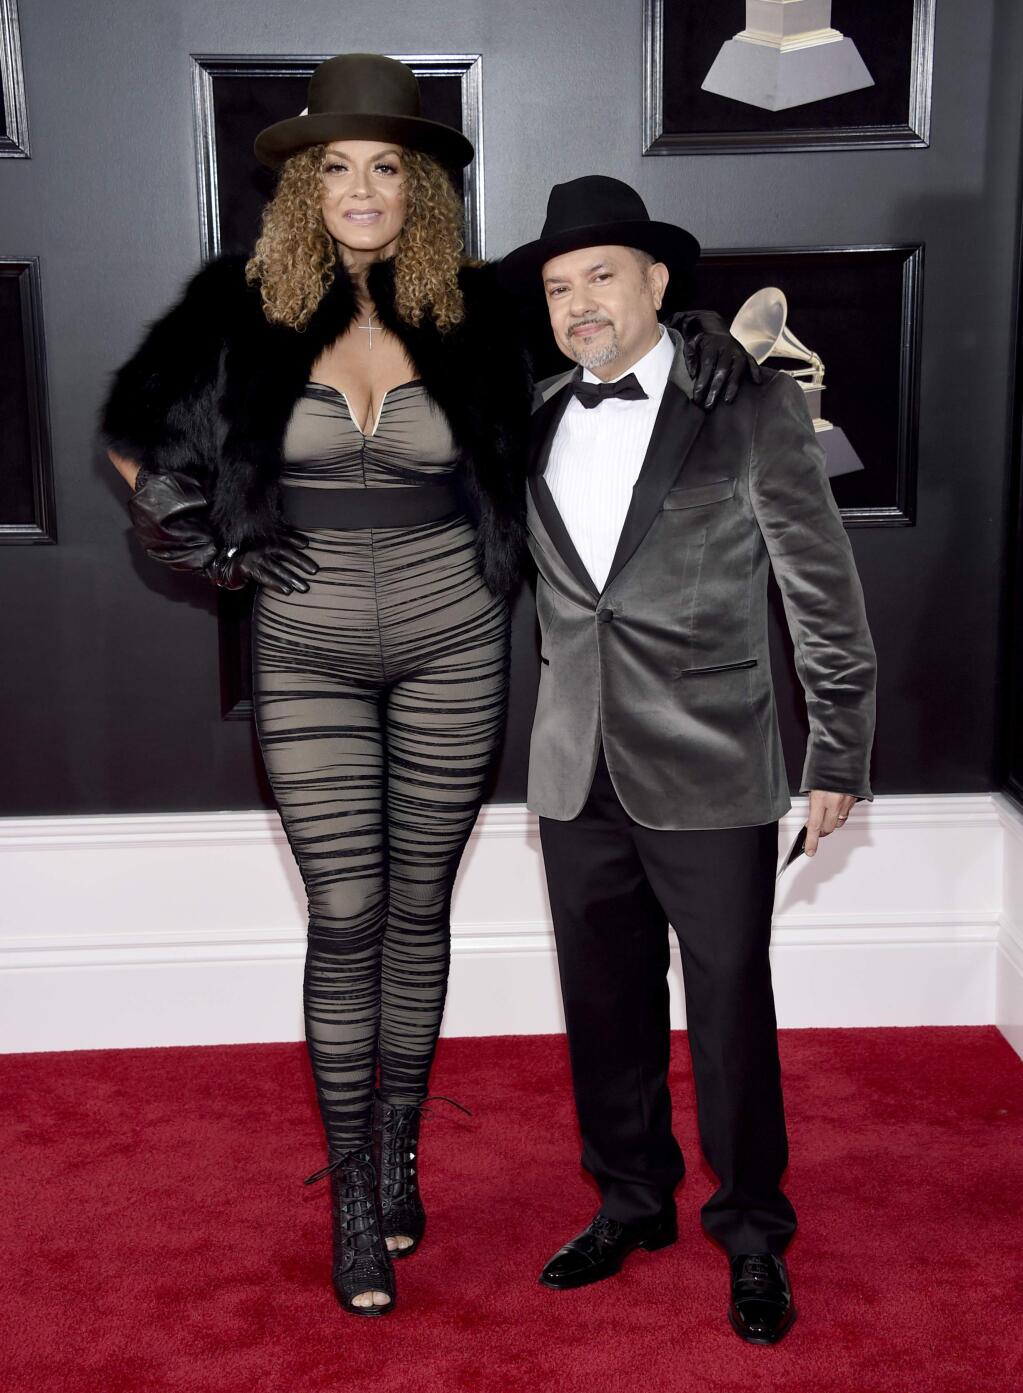 Ana Martins, left, and Little Louie Vega arrive at the 60th annual Grammy Awards at Madison Square Garden on Sunday, Jan. 28, 2018, in New York. (Photo by Evan Agostini/Invision/AP)